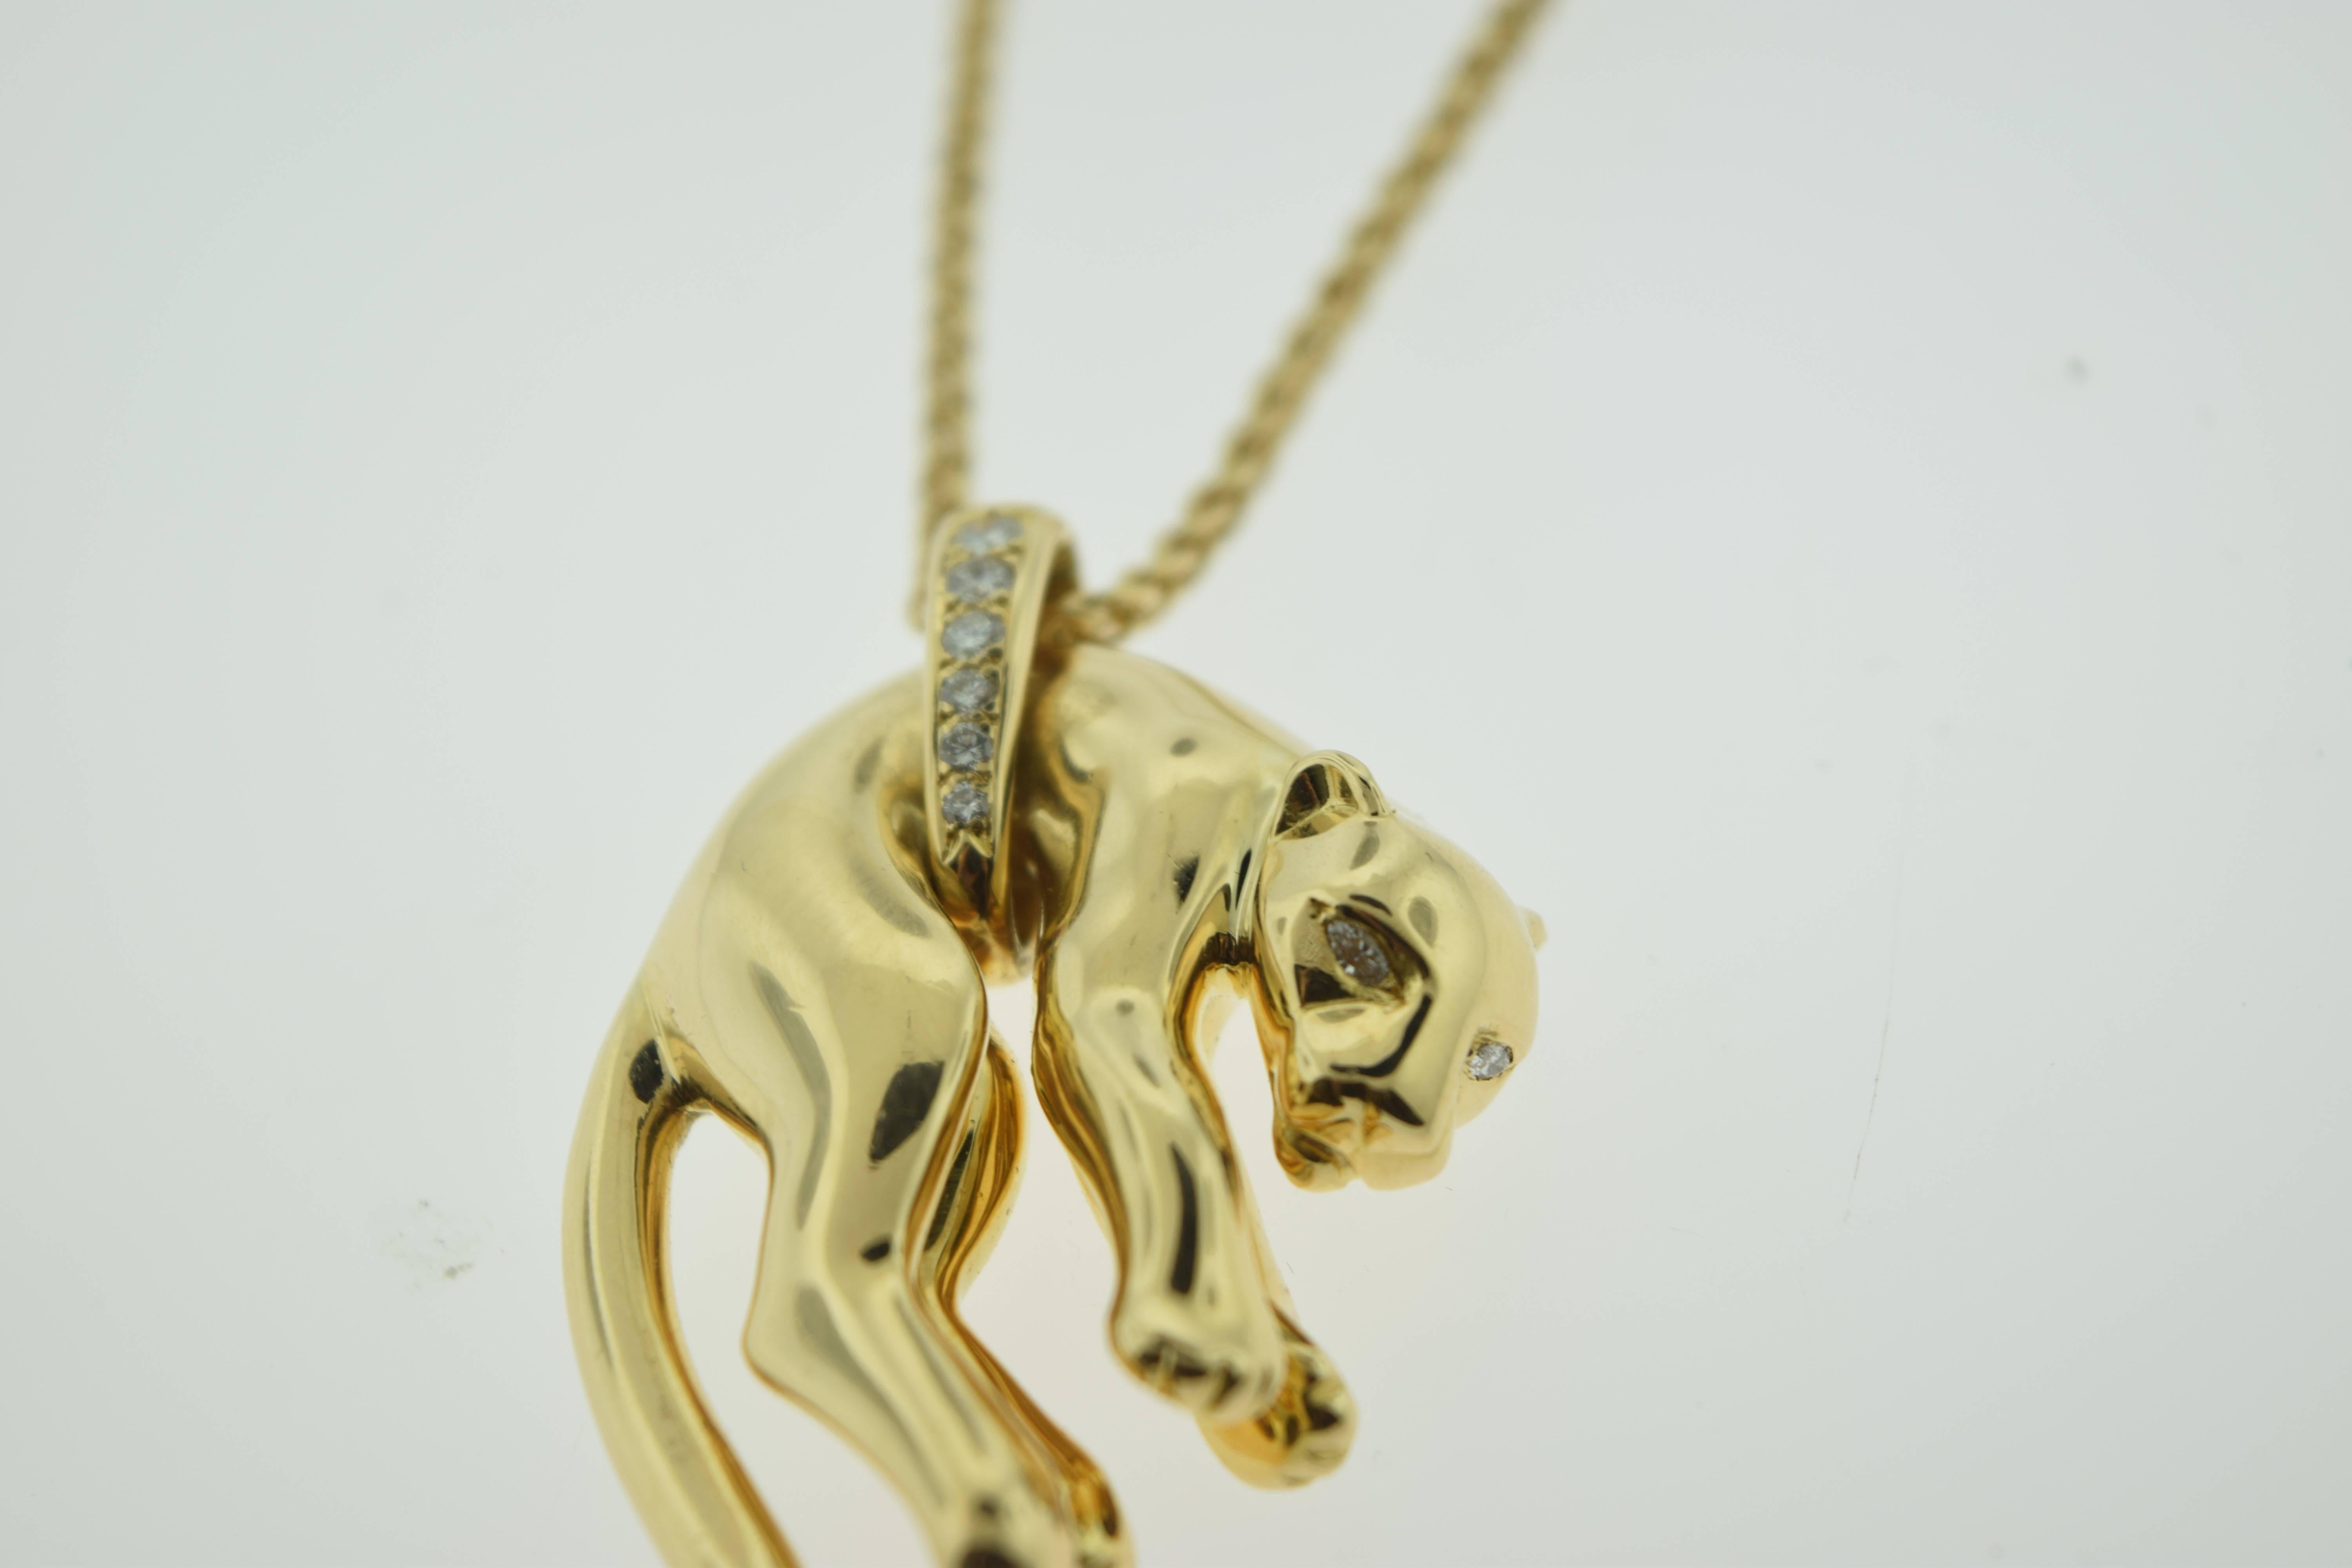 Cartier Diamond Gold Panther Pendant Necklace  In Excellent Condition For Sale In Miami, FL